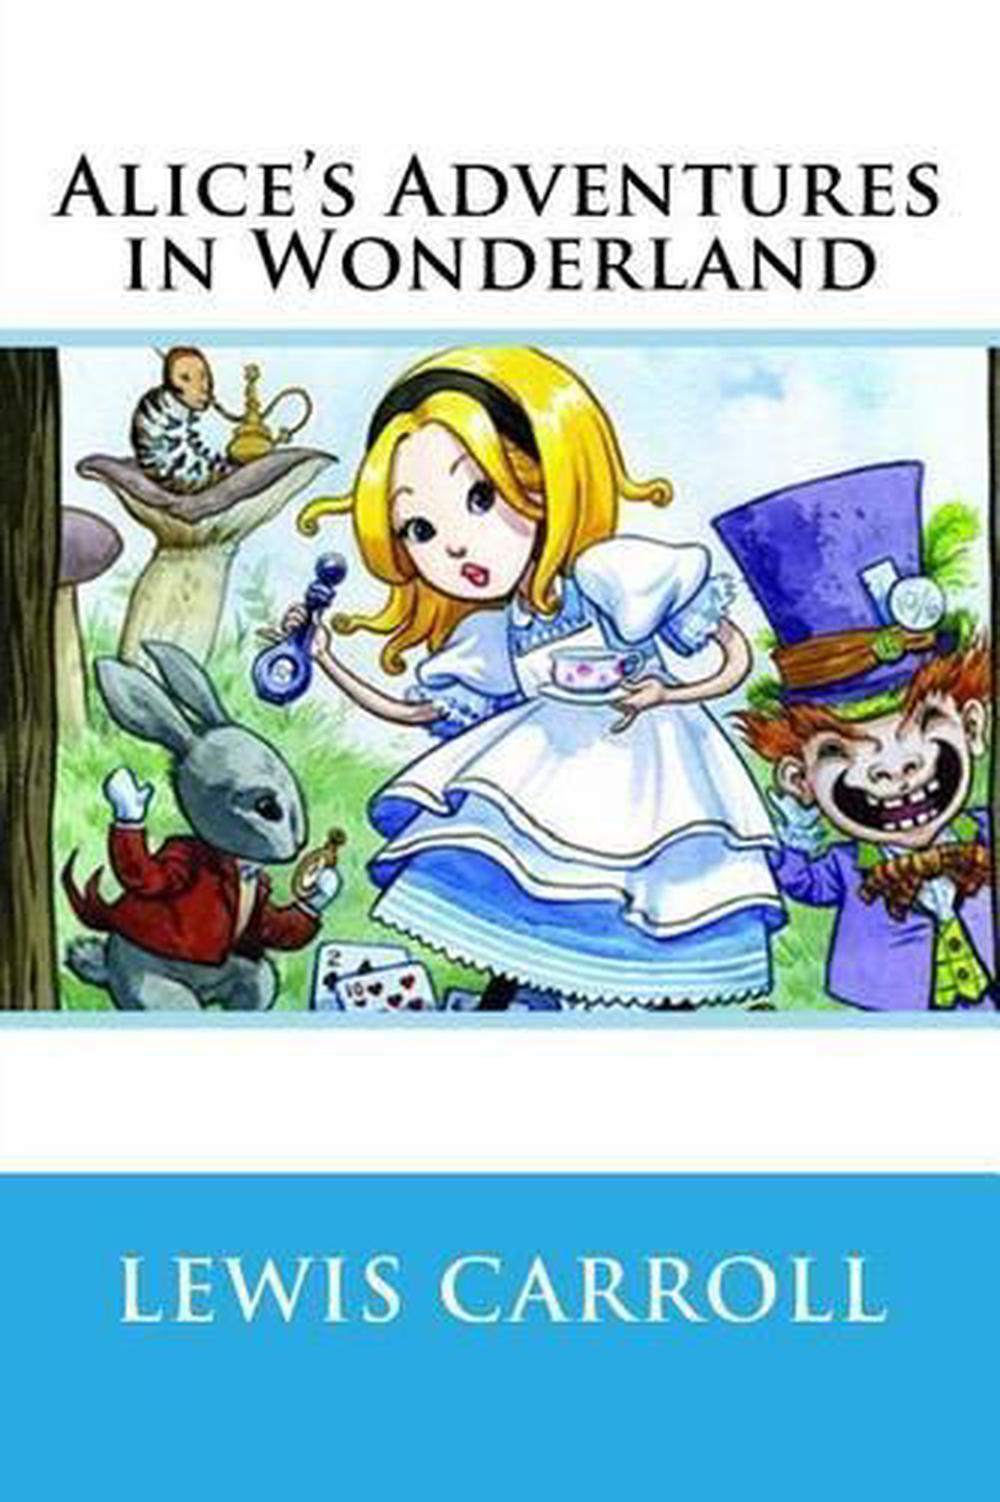 Alice's Adventures in Wonderland by Lewis Carroll (English) Paperback ...